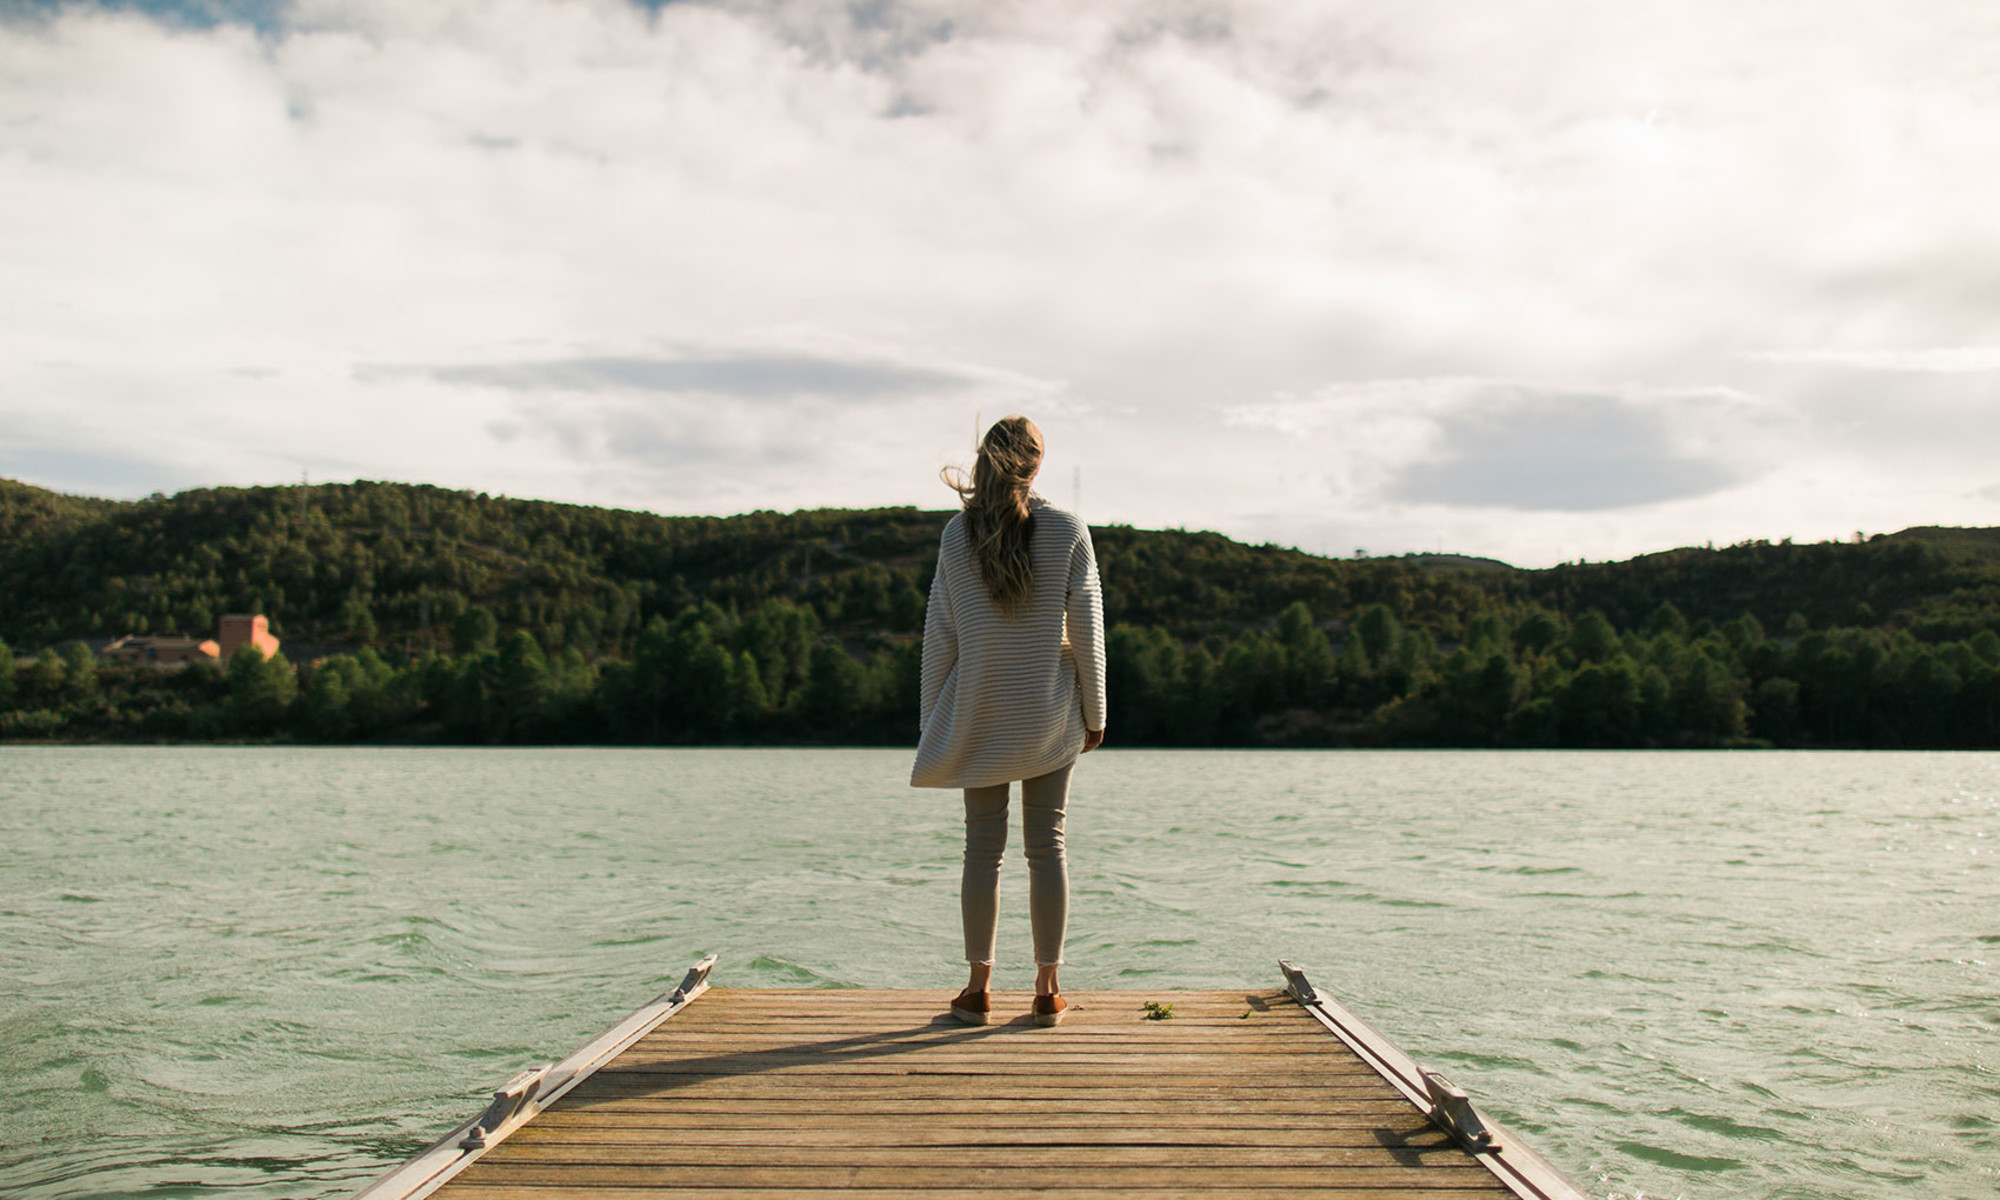 How To Find Yourself In 14 Small, Meaningful Steps